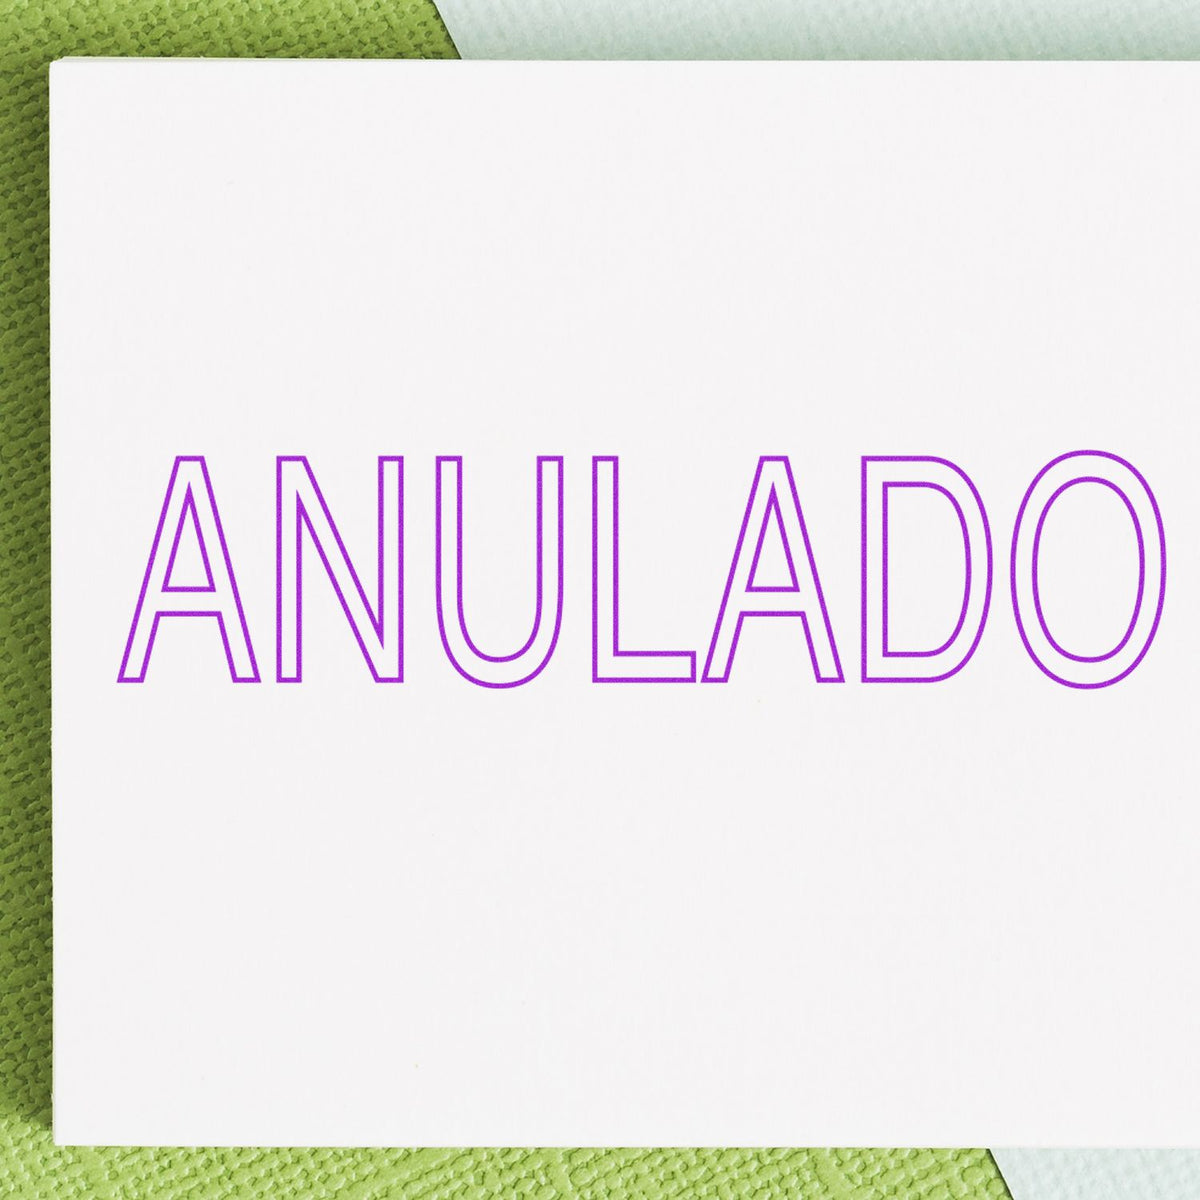 Outline Anulado Rubber Stamp In Use